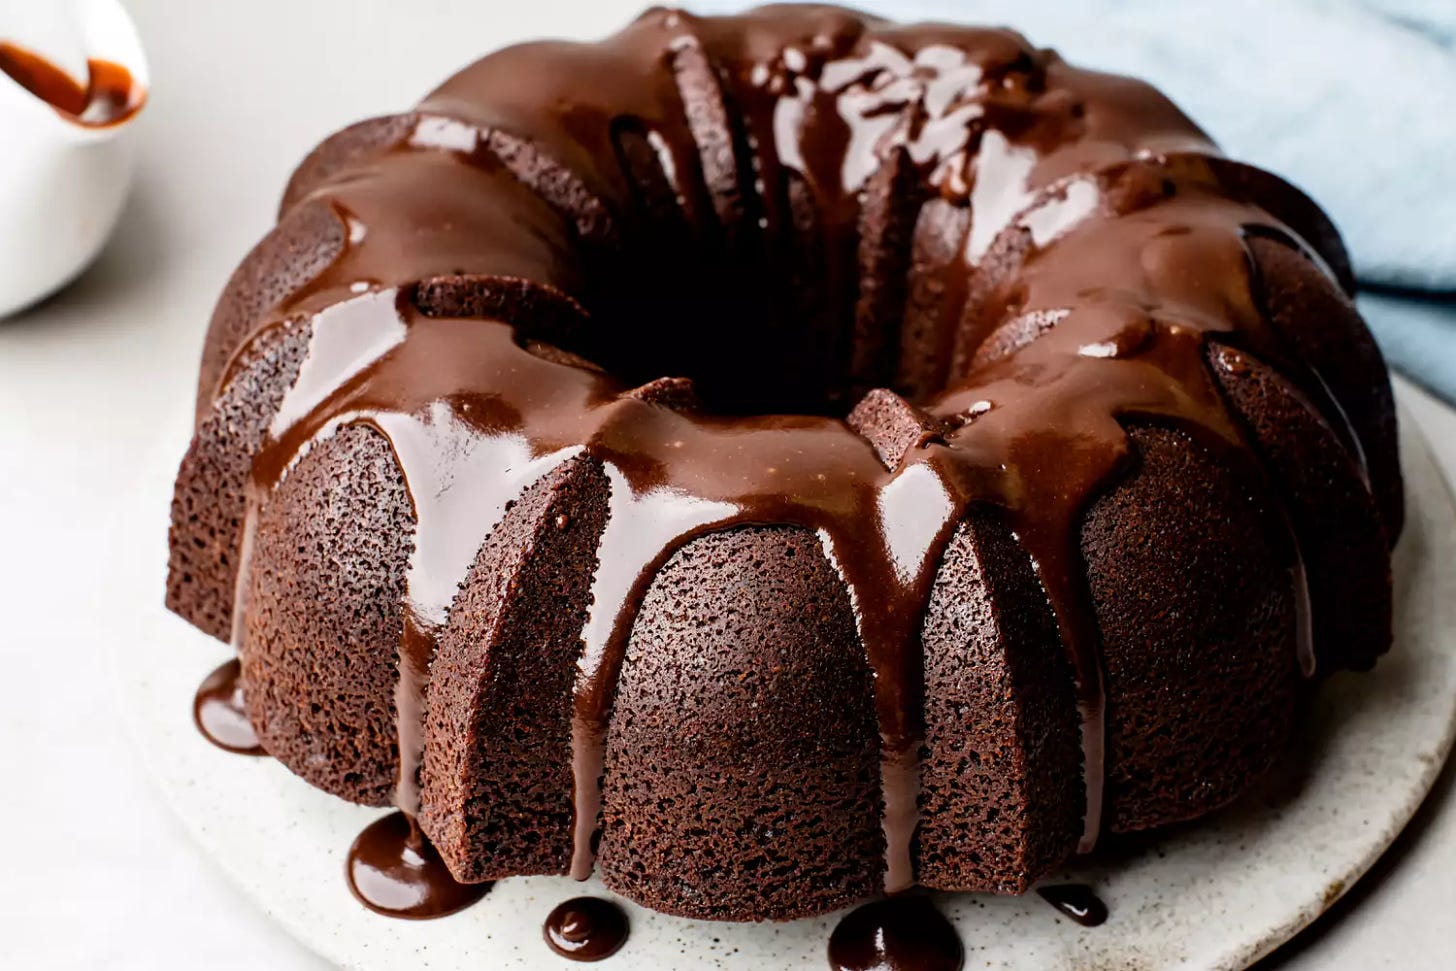 Chocolate glaze being drizzled unevenly over a chocolate Bundt cake, dripping down the sides onto plate